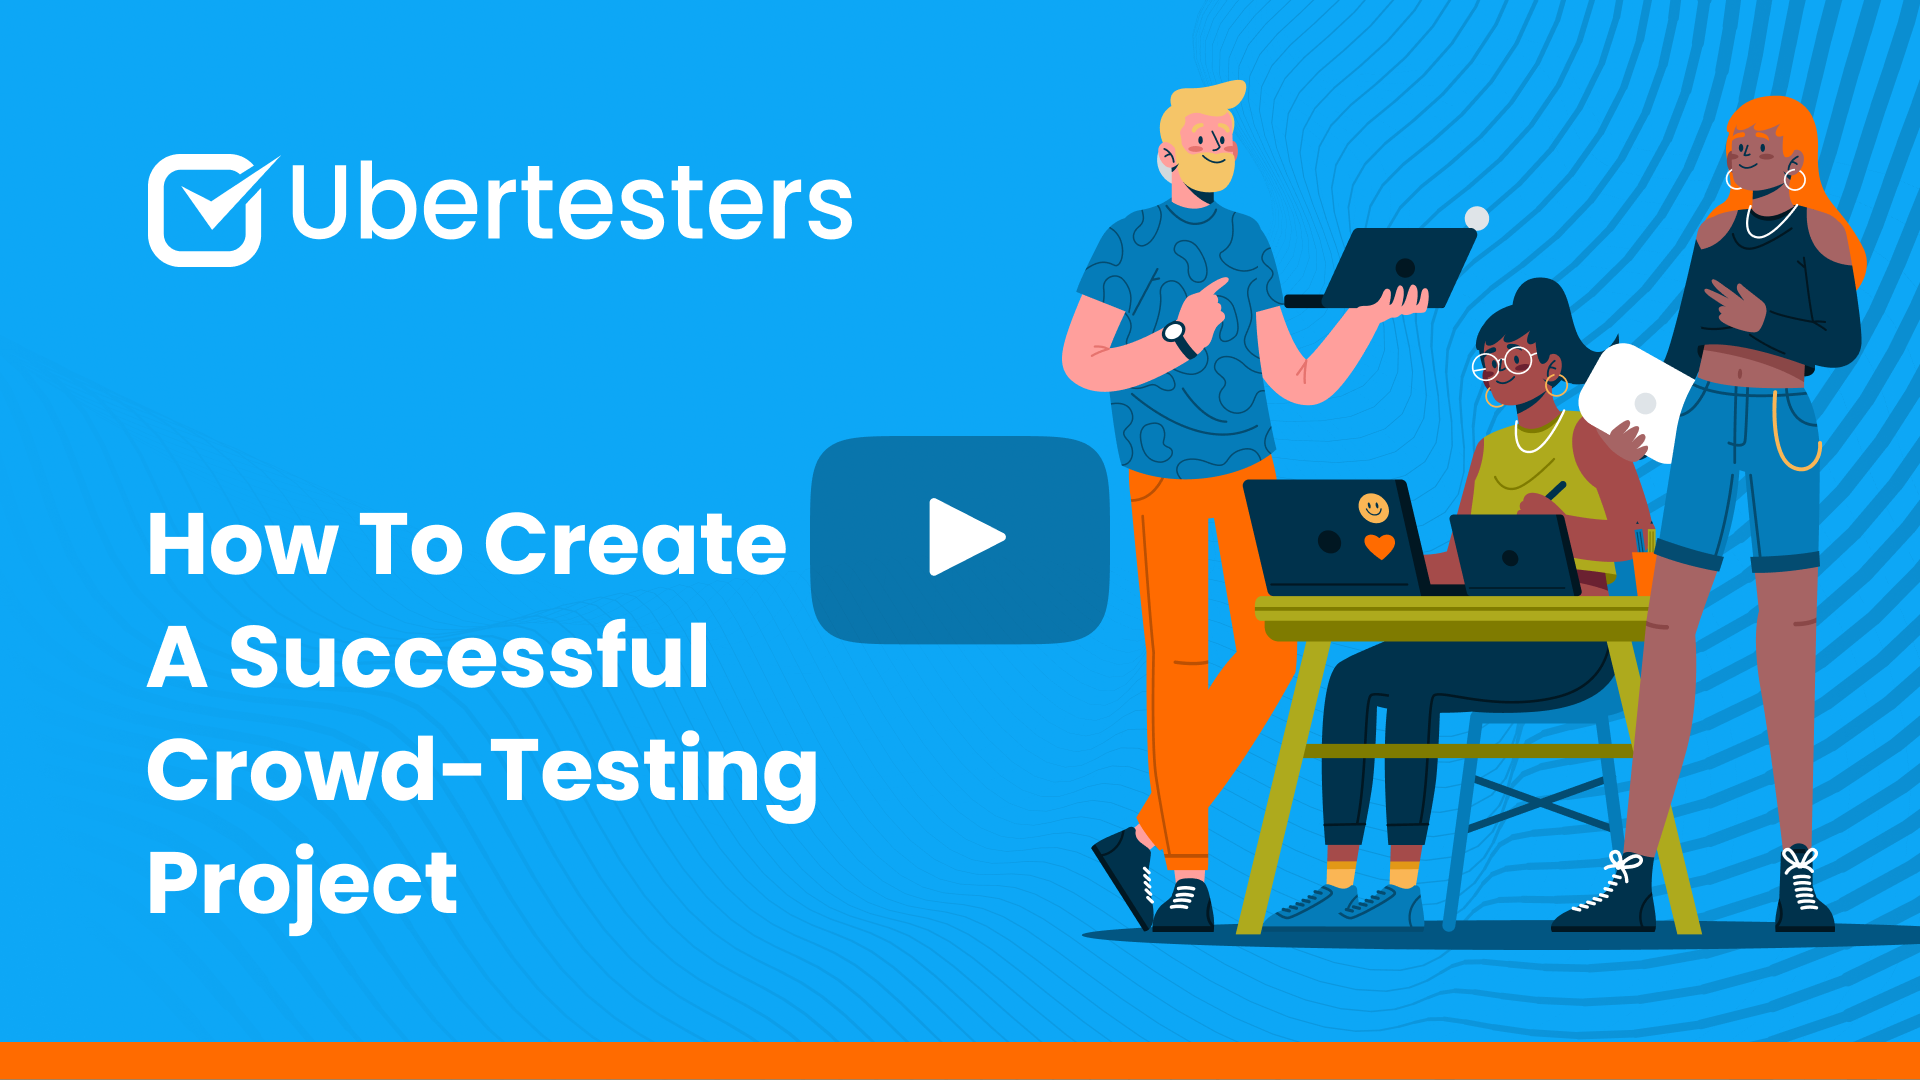 How To Create a Successful Crowd-Testing Project